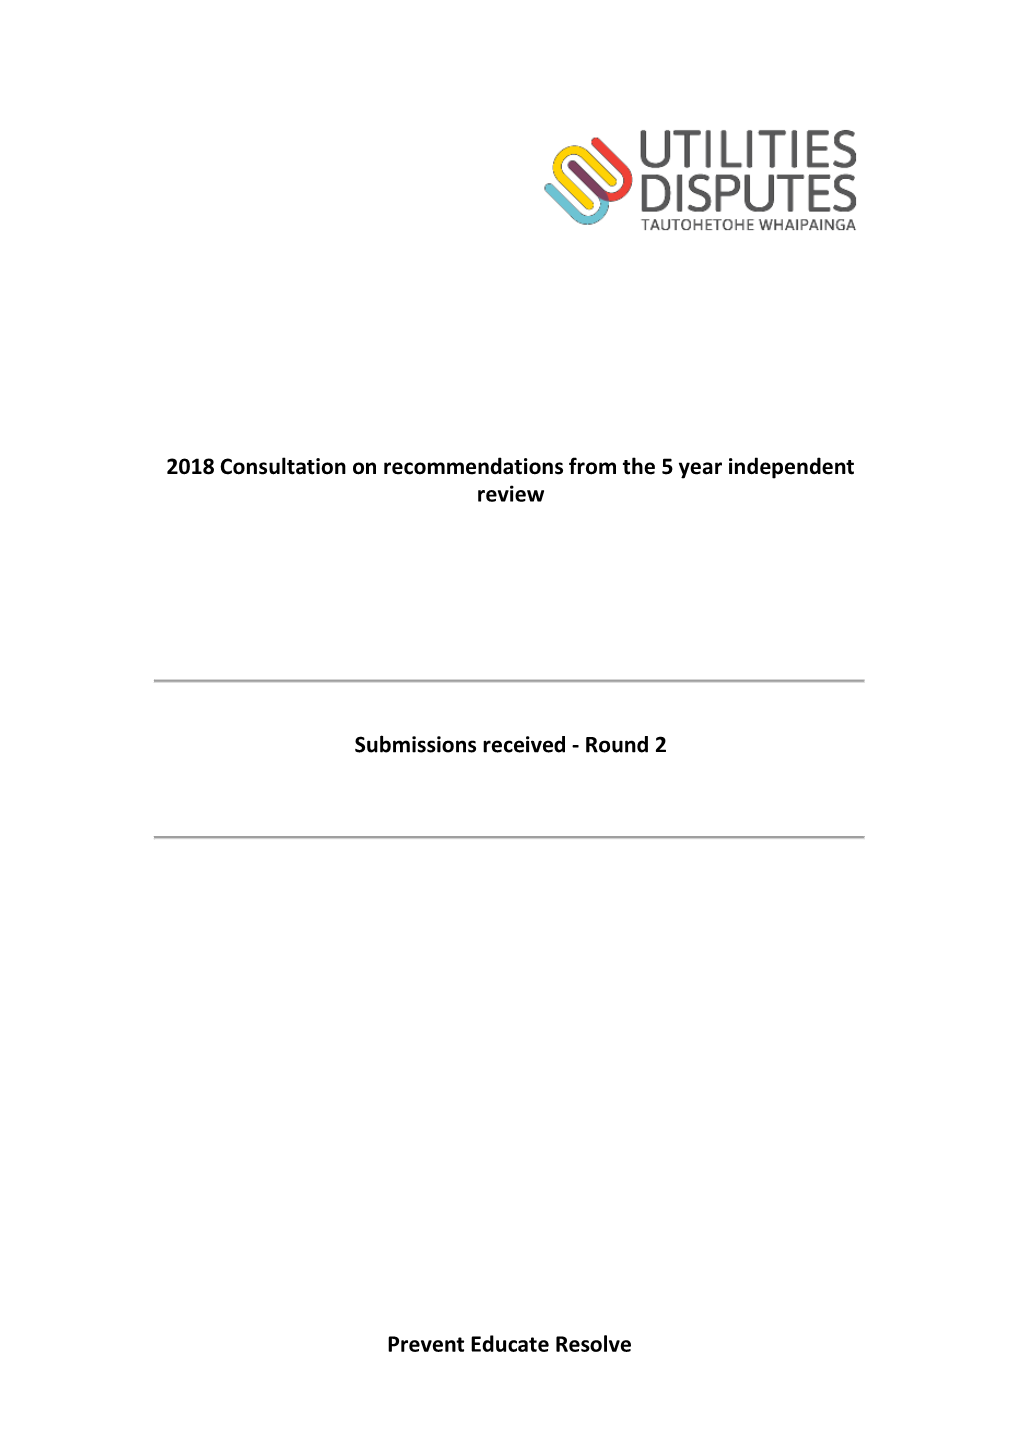 2018 Consultation on Recommendations from the 5 Year Independent Review